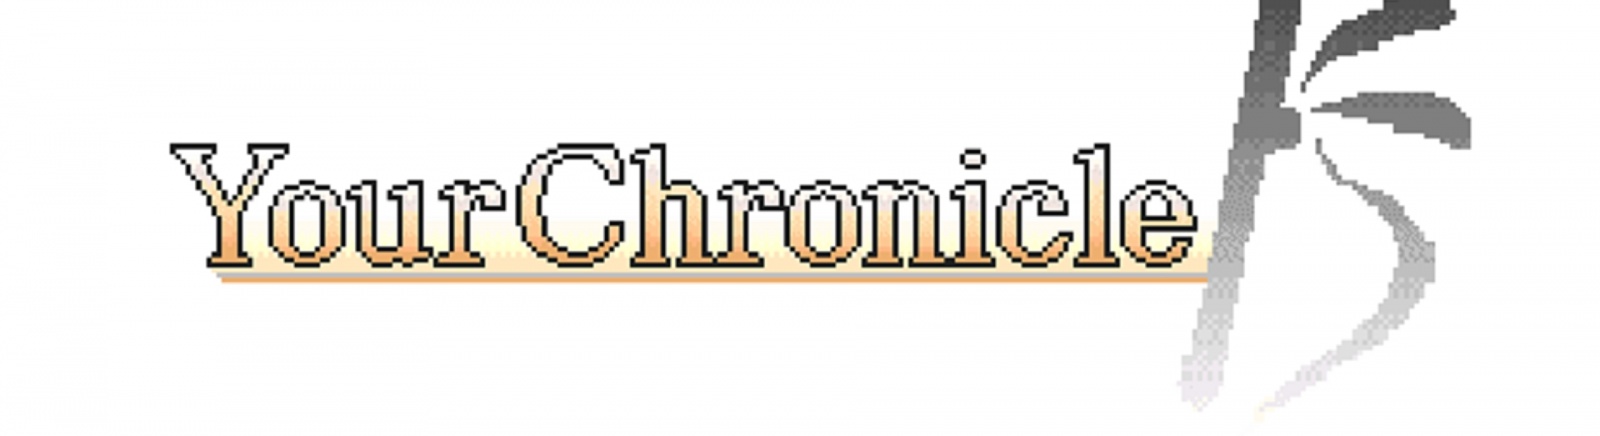 your chronicle idle